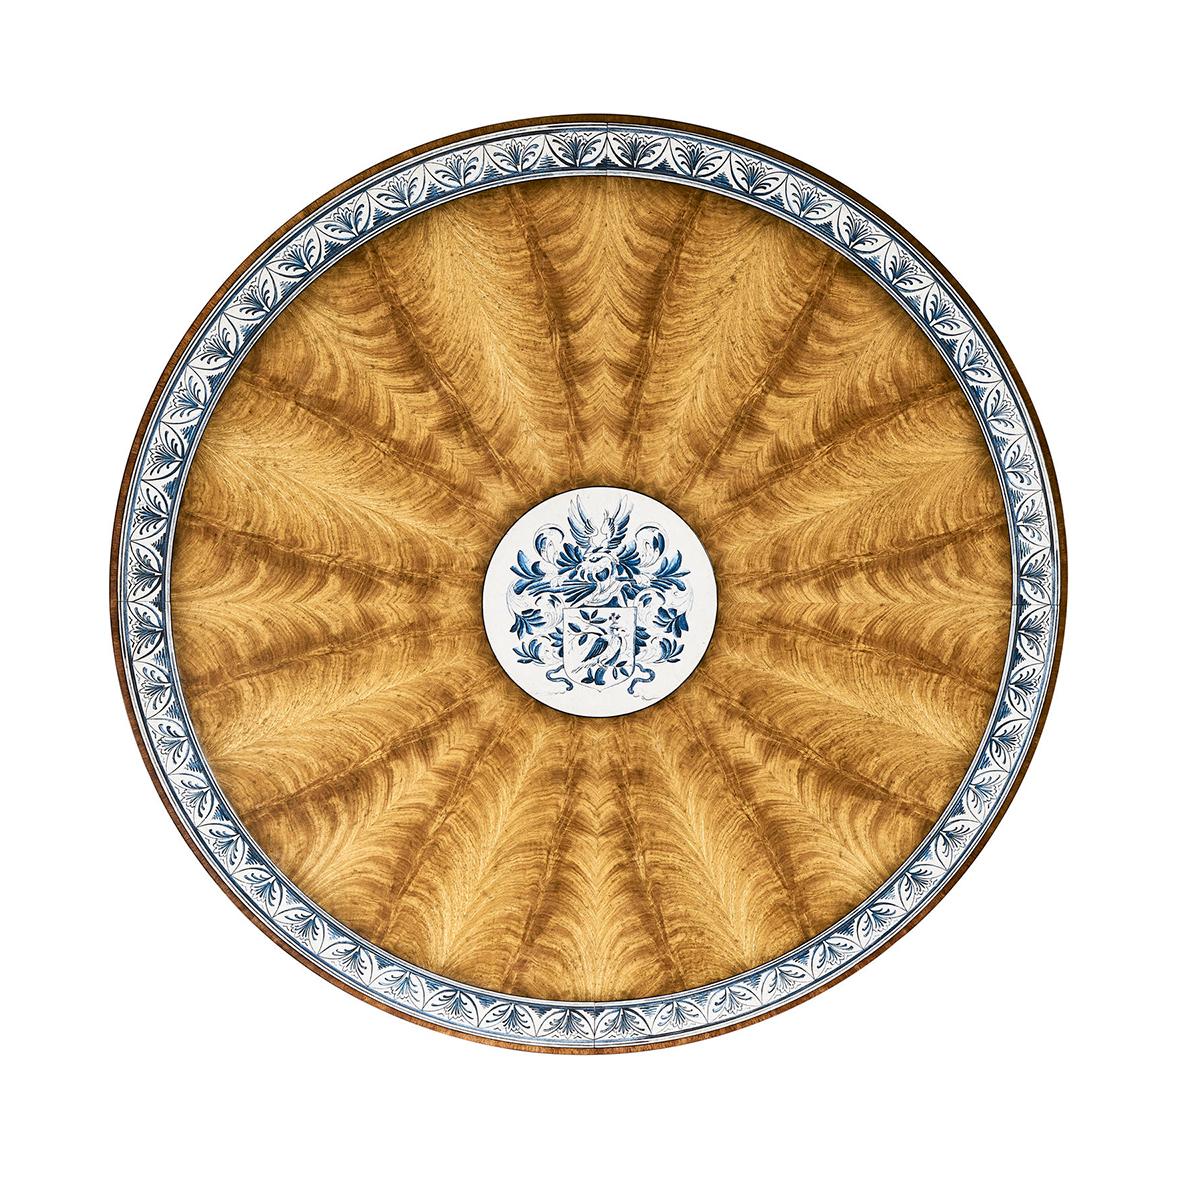 58-inch diameter with seating for up to six. A classic early 19th-century English design with handpainted crossbanding in a Dutch Delft pattern.

The round, fixed tabletop showcases the artistry of inlaid veneer work, capturing the eye with its